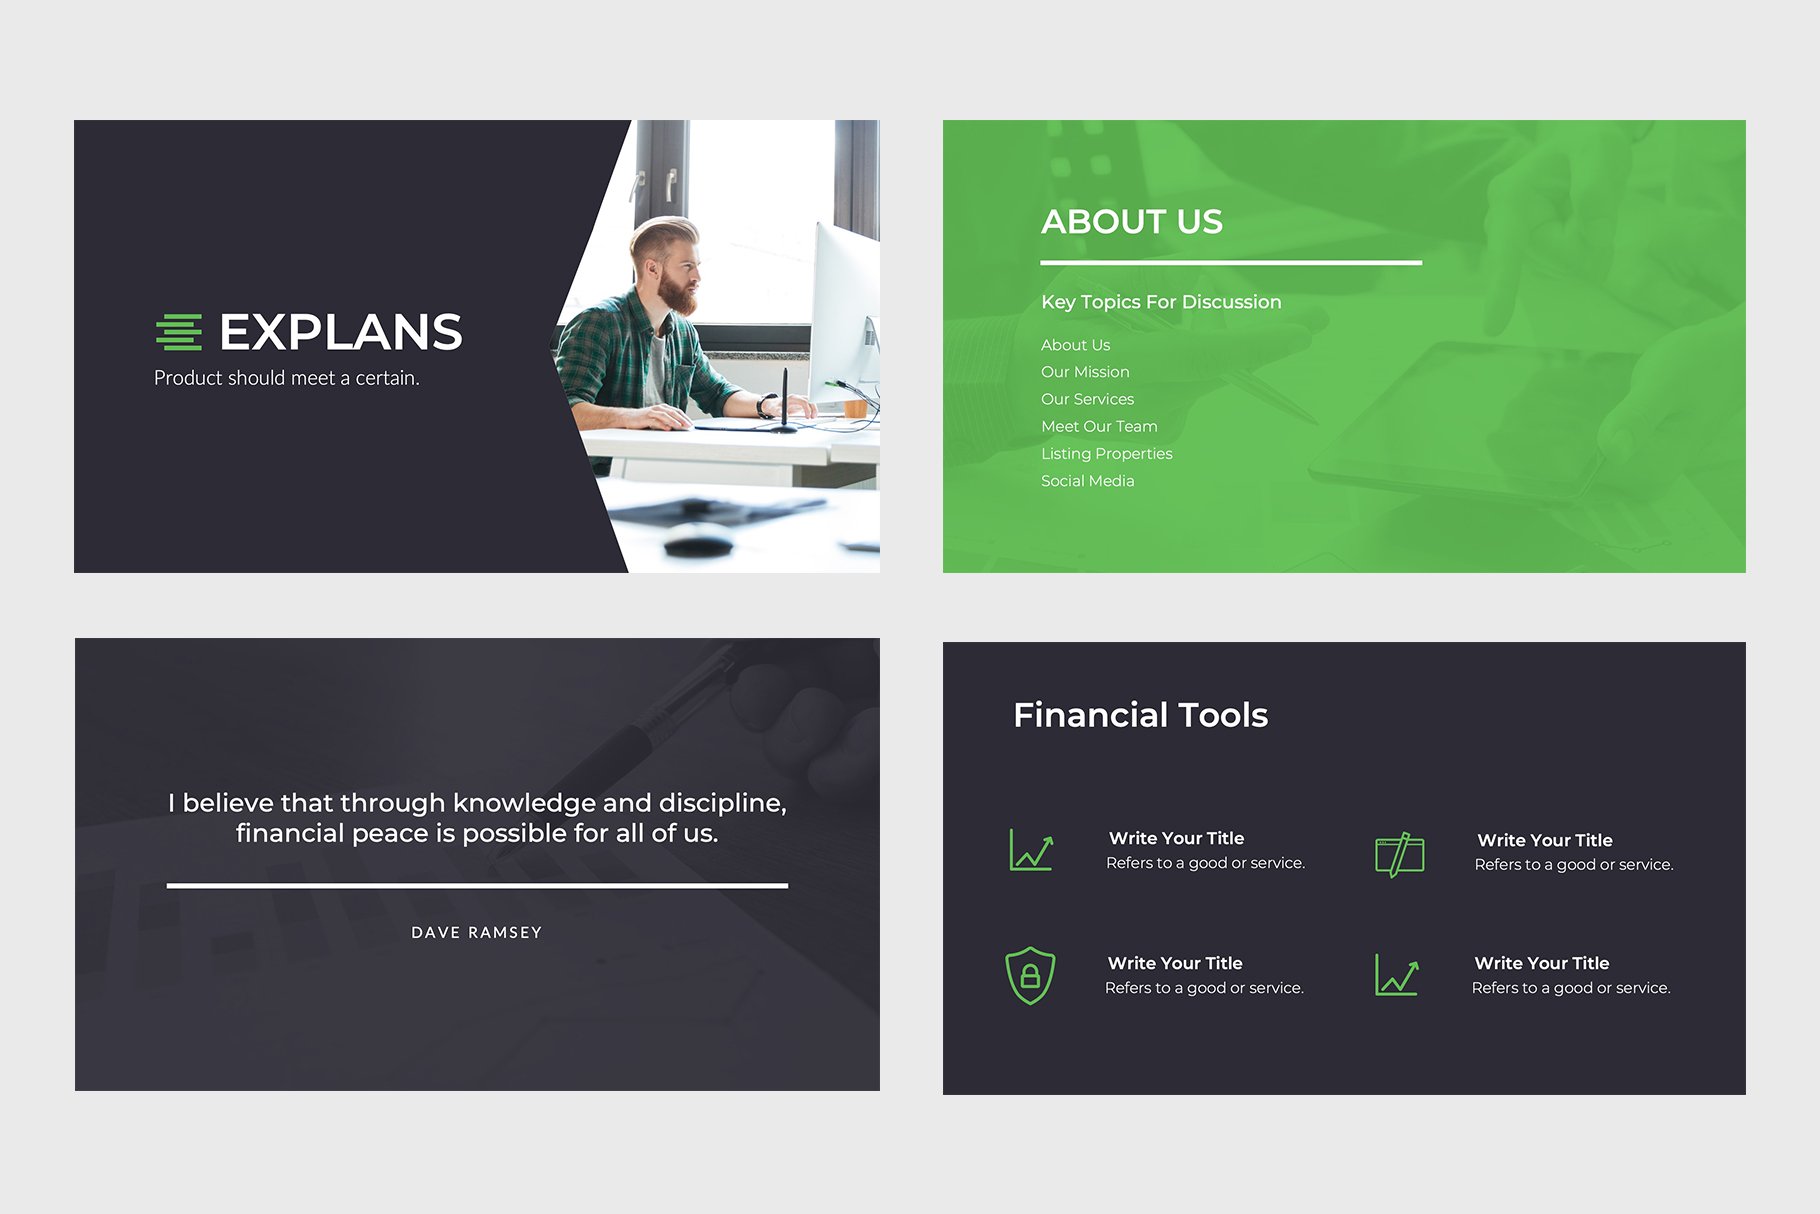 This is a minimalistic template in green and grey.